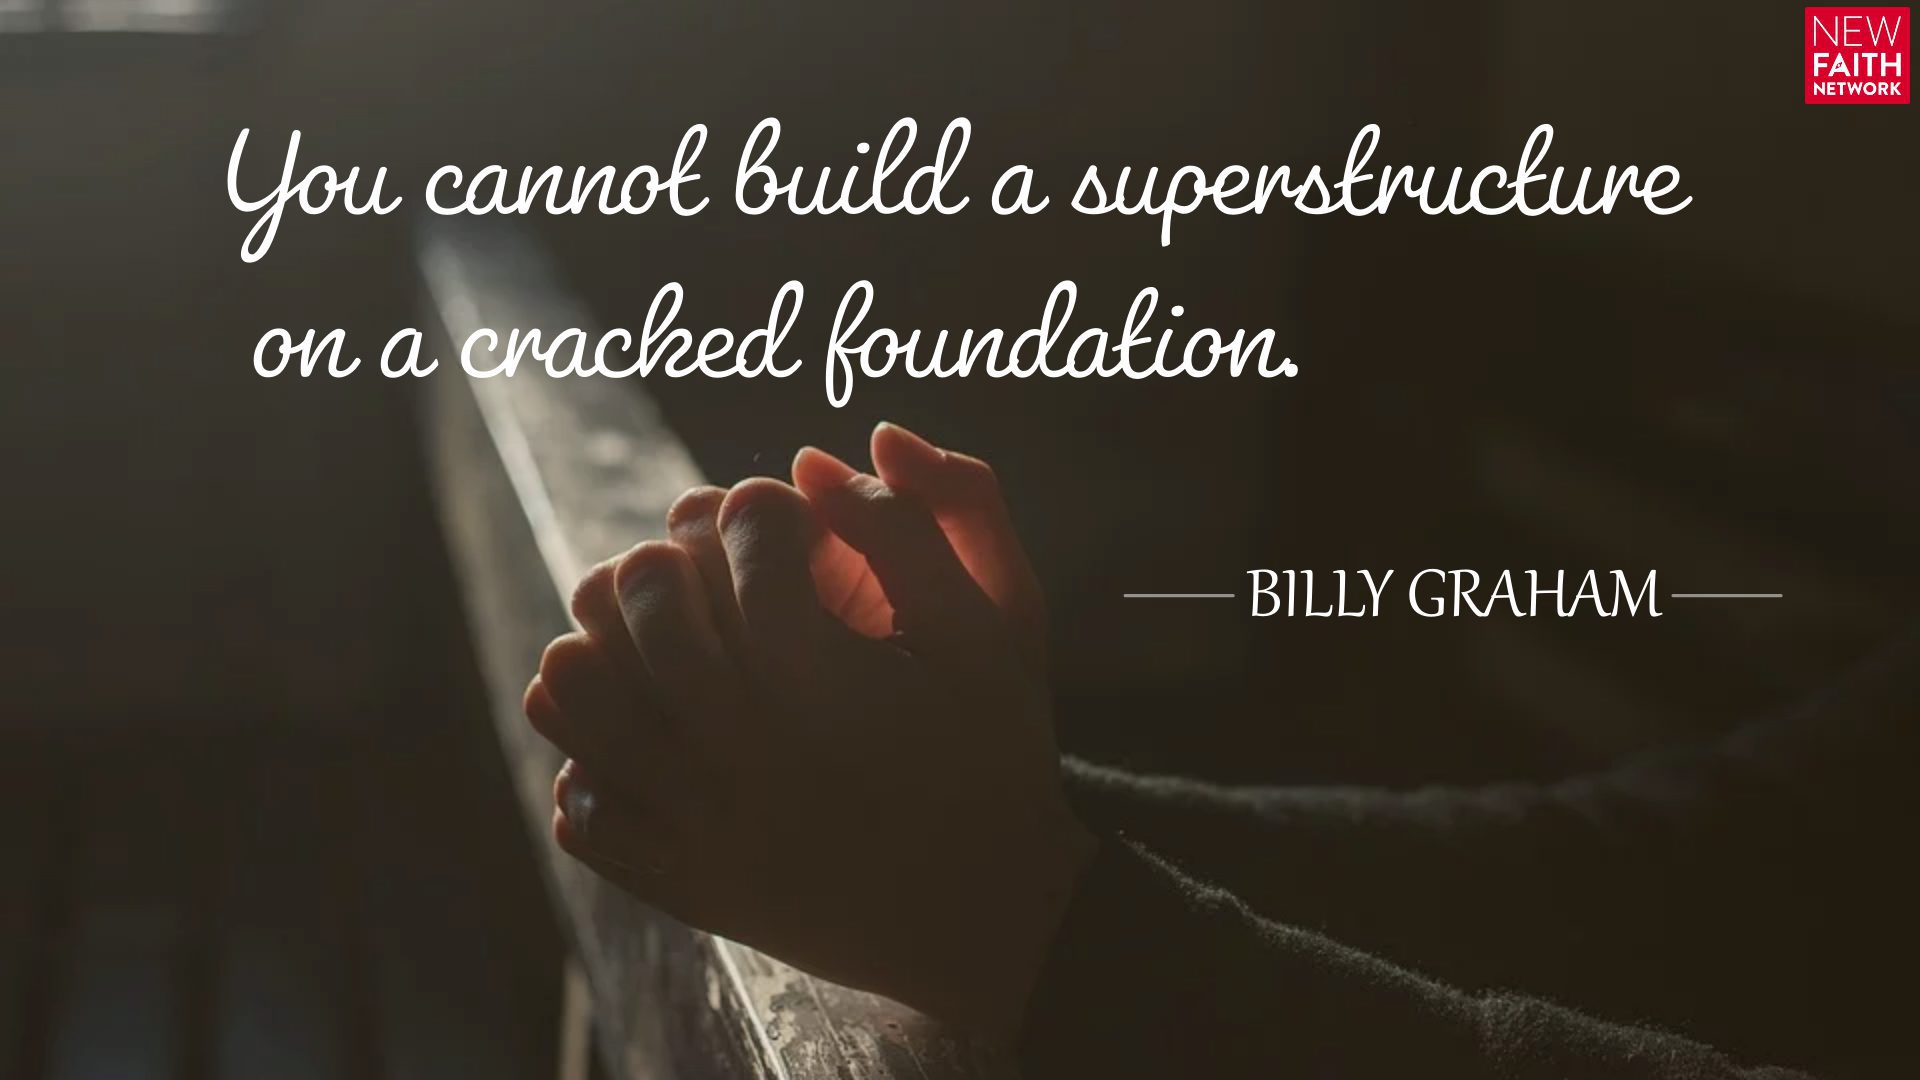 You cannot build a superstructure on a cracked foundation.